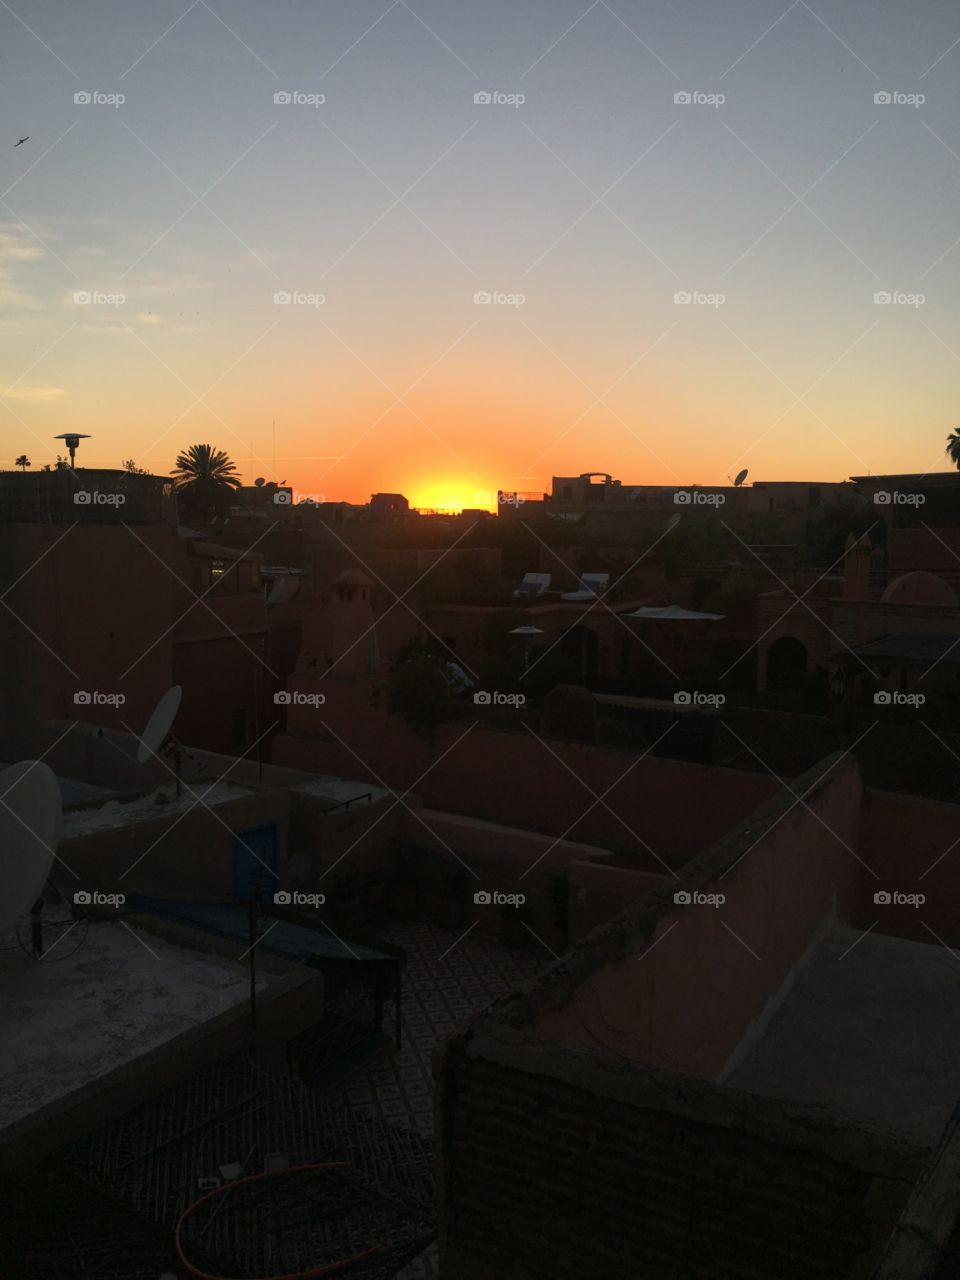 A Moroccan sunset